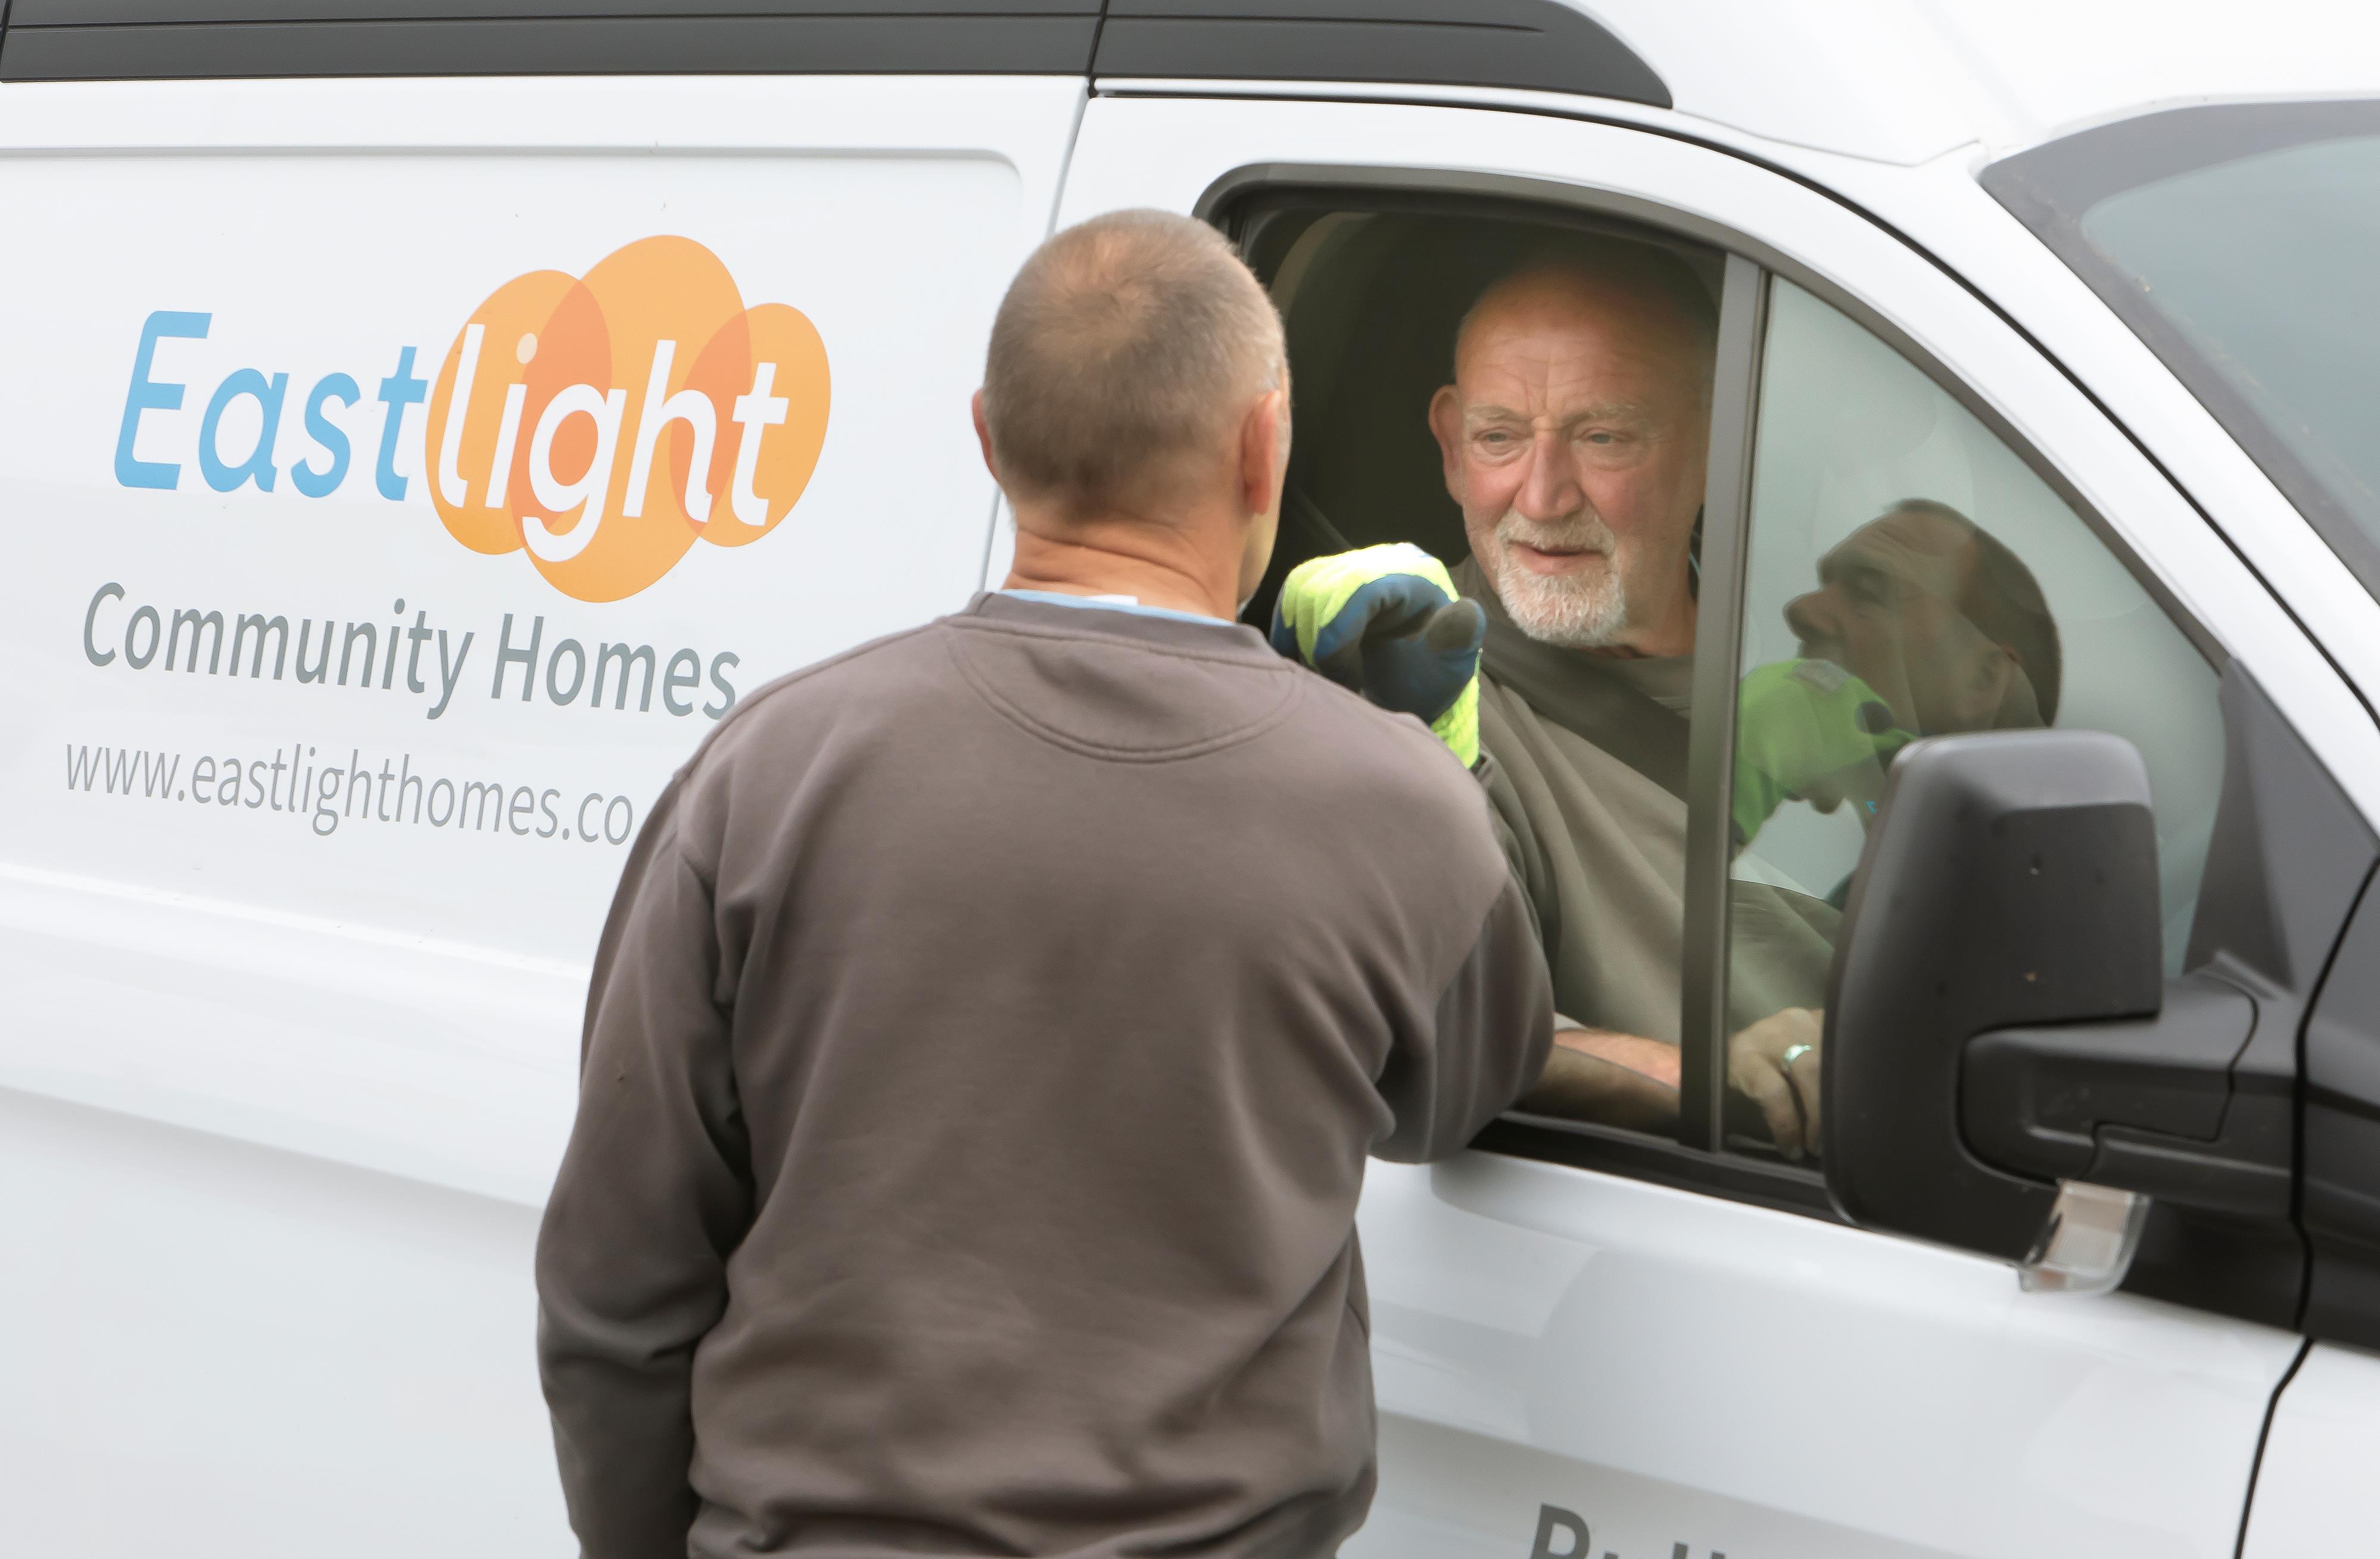 Estate Ranger, Marc, is sitting in the drivers seat of an Eastlight van. He is talking to a man who is standing outside the van.